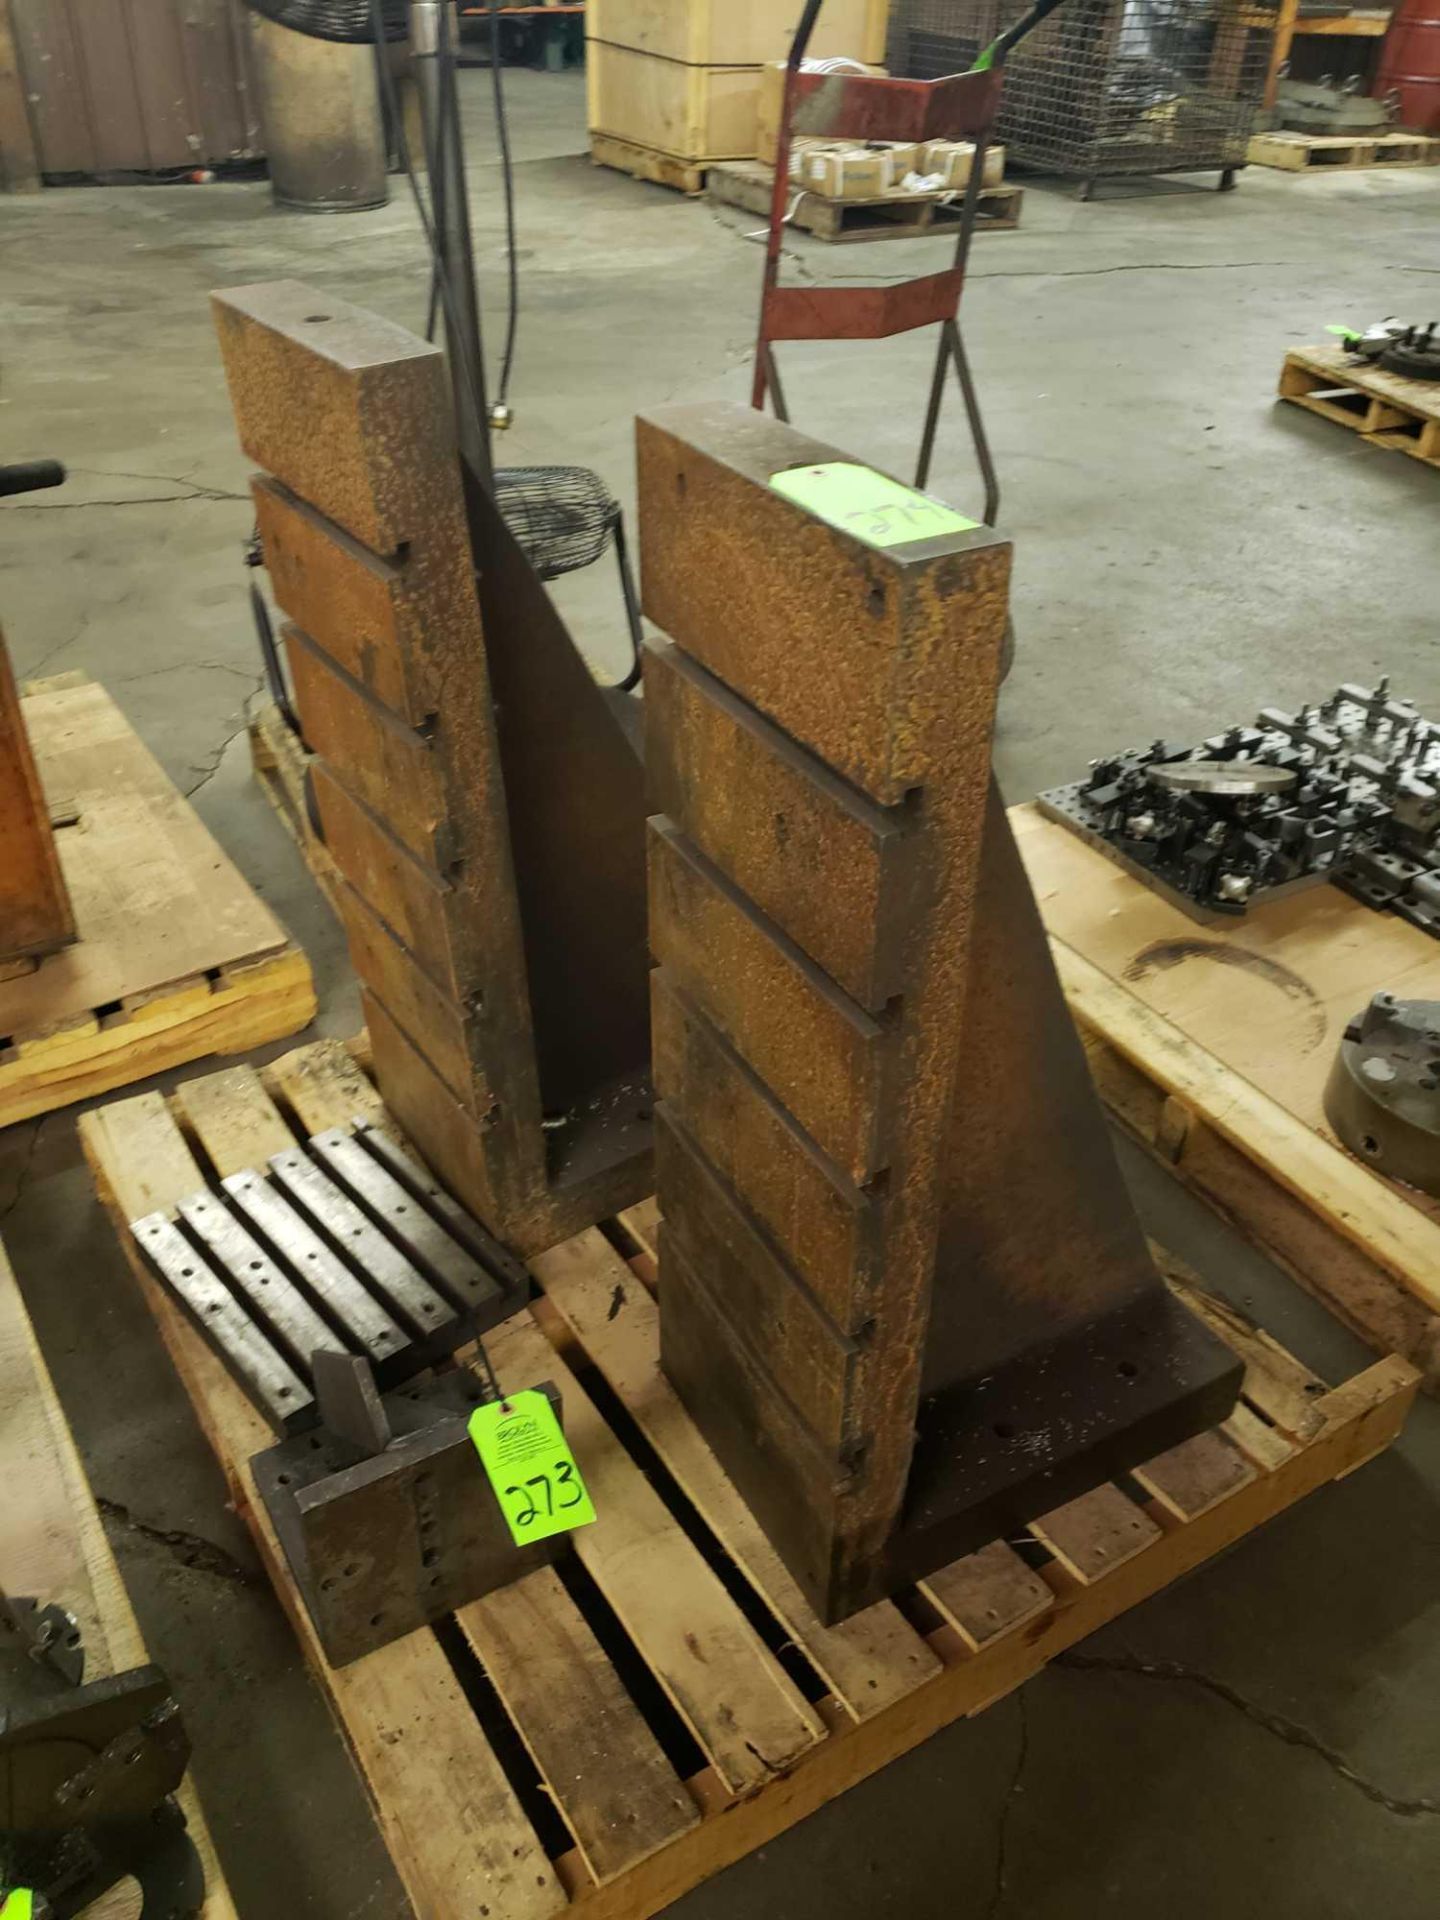 Qty 2 - T-slotted angle plates. Approx 36" tall by 12" wide.